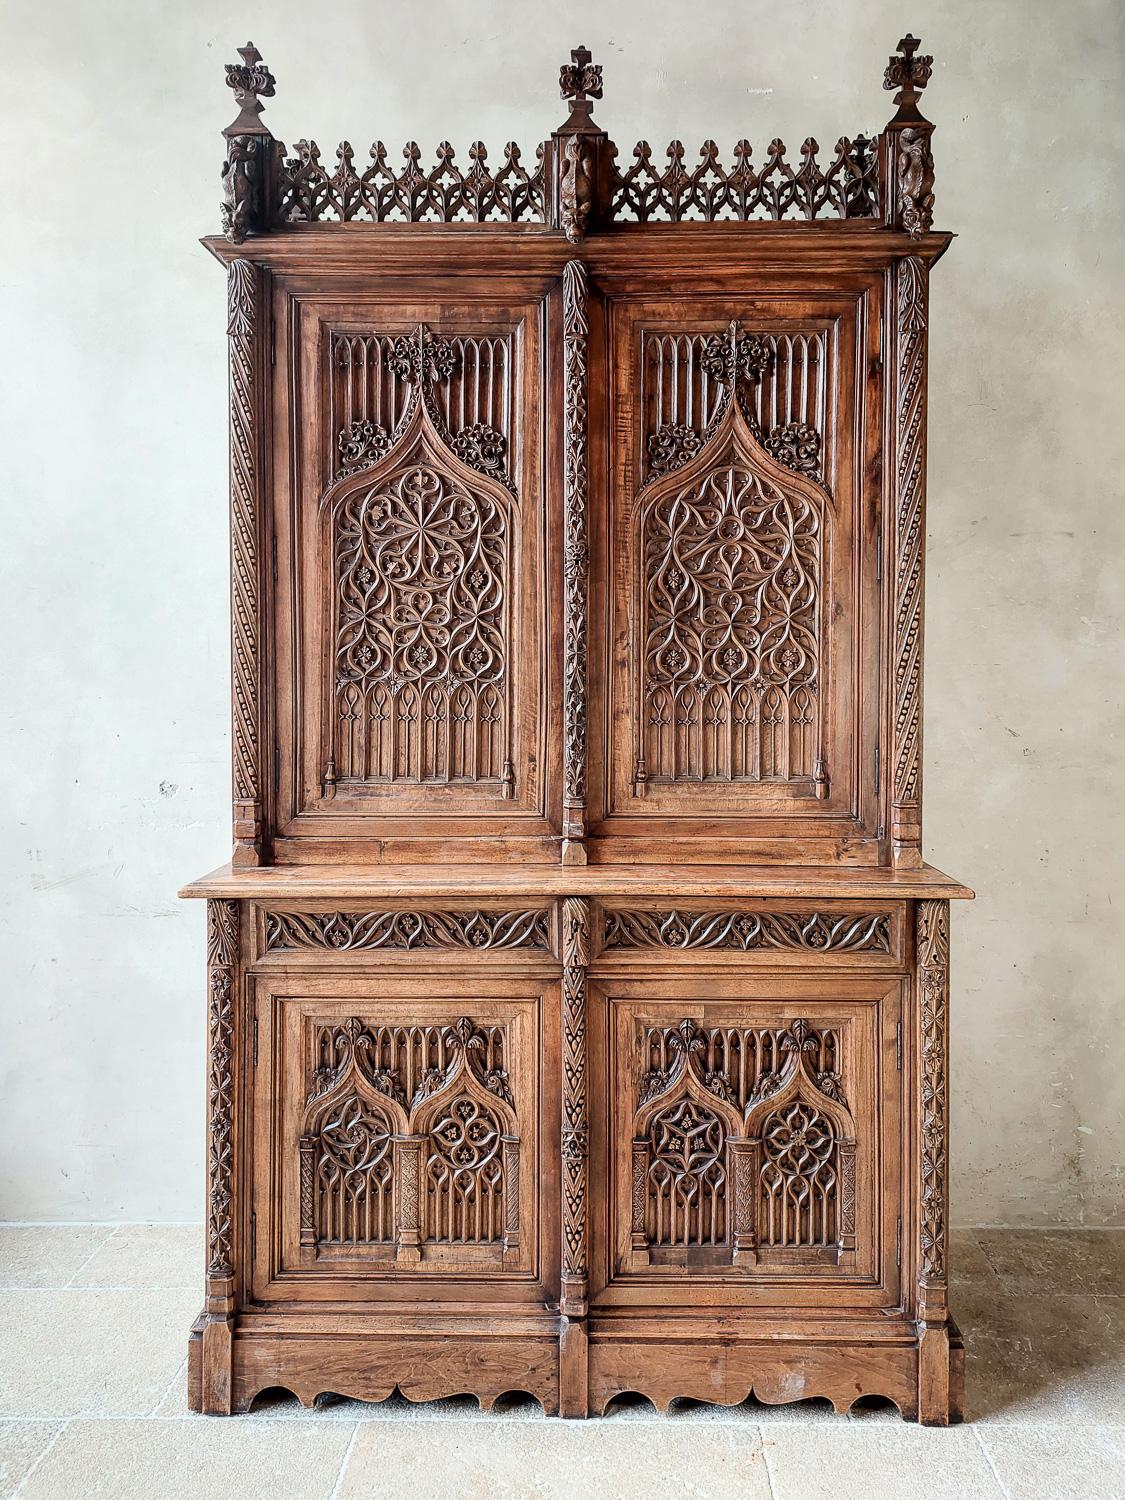 A large and very richly carved 19th century French walnut Gothic Revival armoire. 

This stunning cabinet has the most amazing carved details. The extensively carved decorations with the finest details are executed with the best craftsmanship's